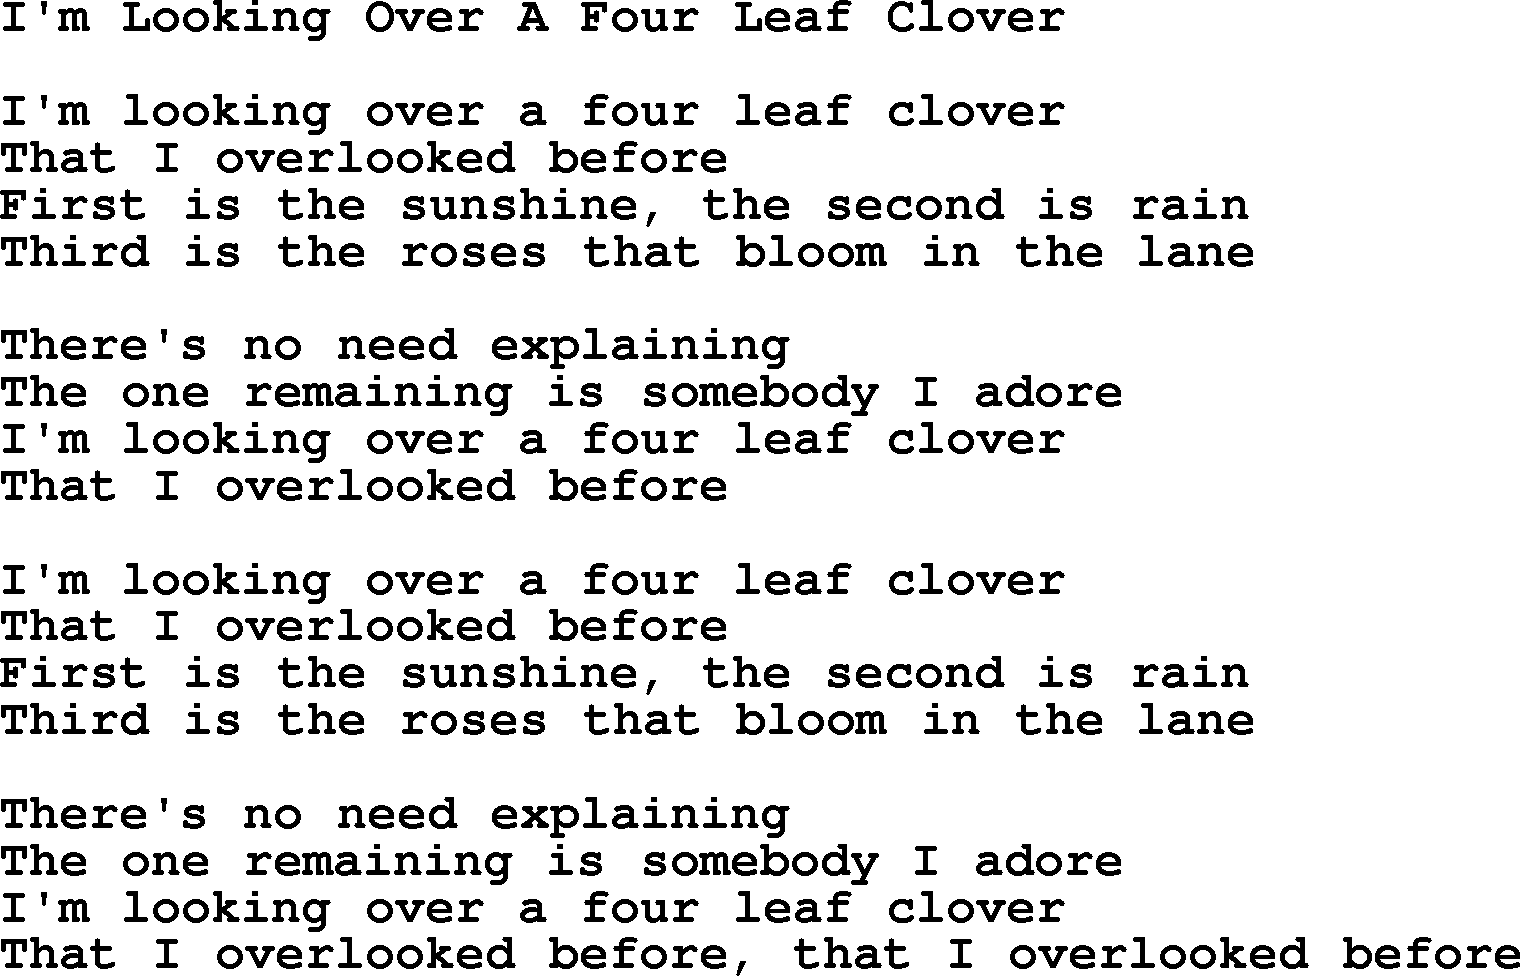 Willie Nelson song: I'm Looking Over A Four Leaf Clover lyrics